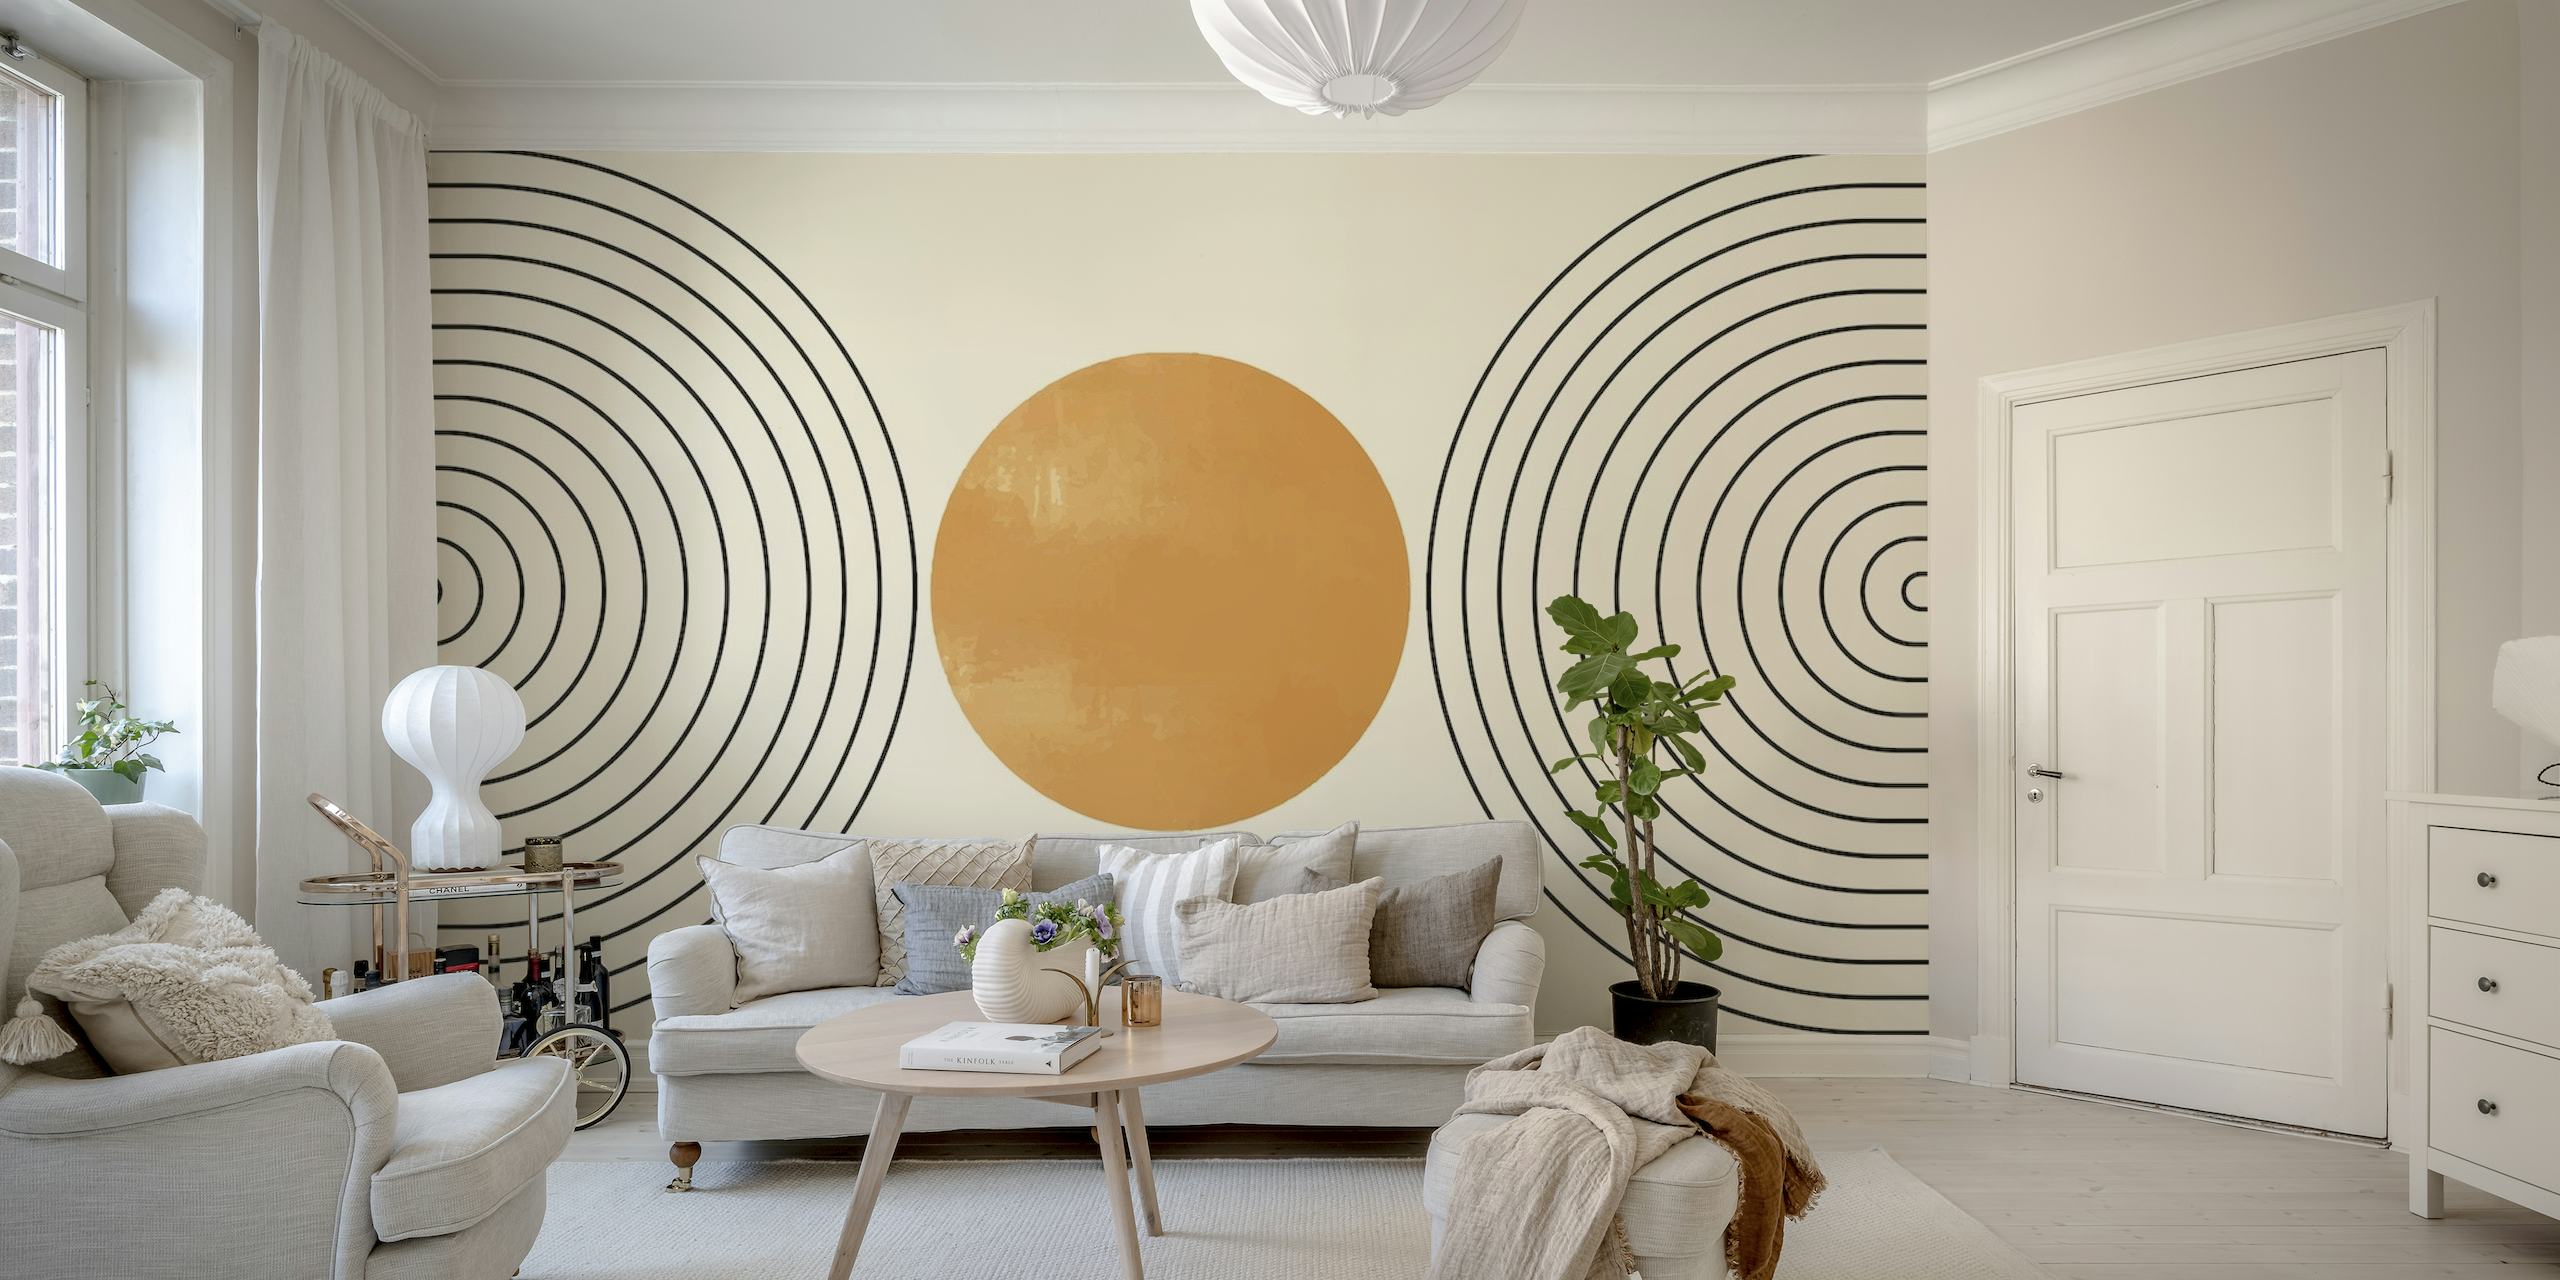 Mid Century III abstract wall mural with concentric circles and central orb in earth tones